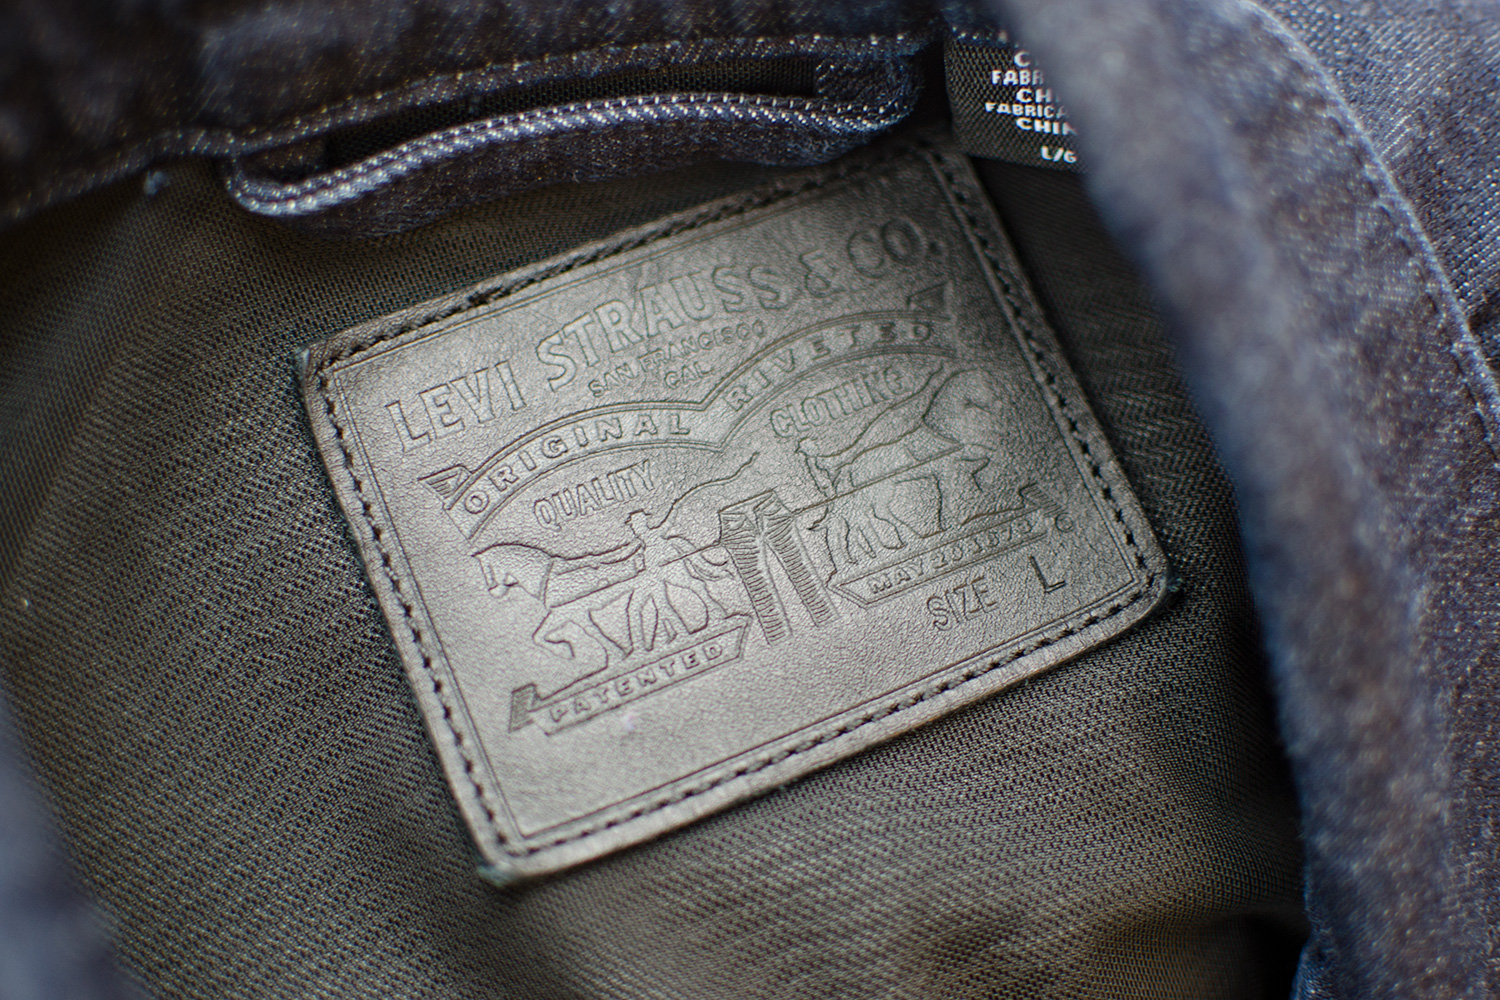 Google and Levi’s take on wearable tech with Jacquard denim jacket ...